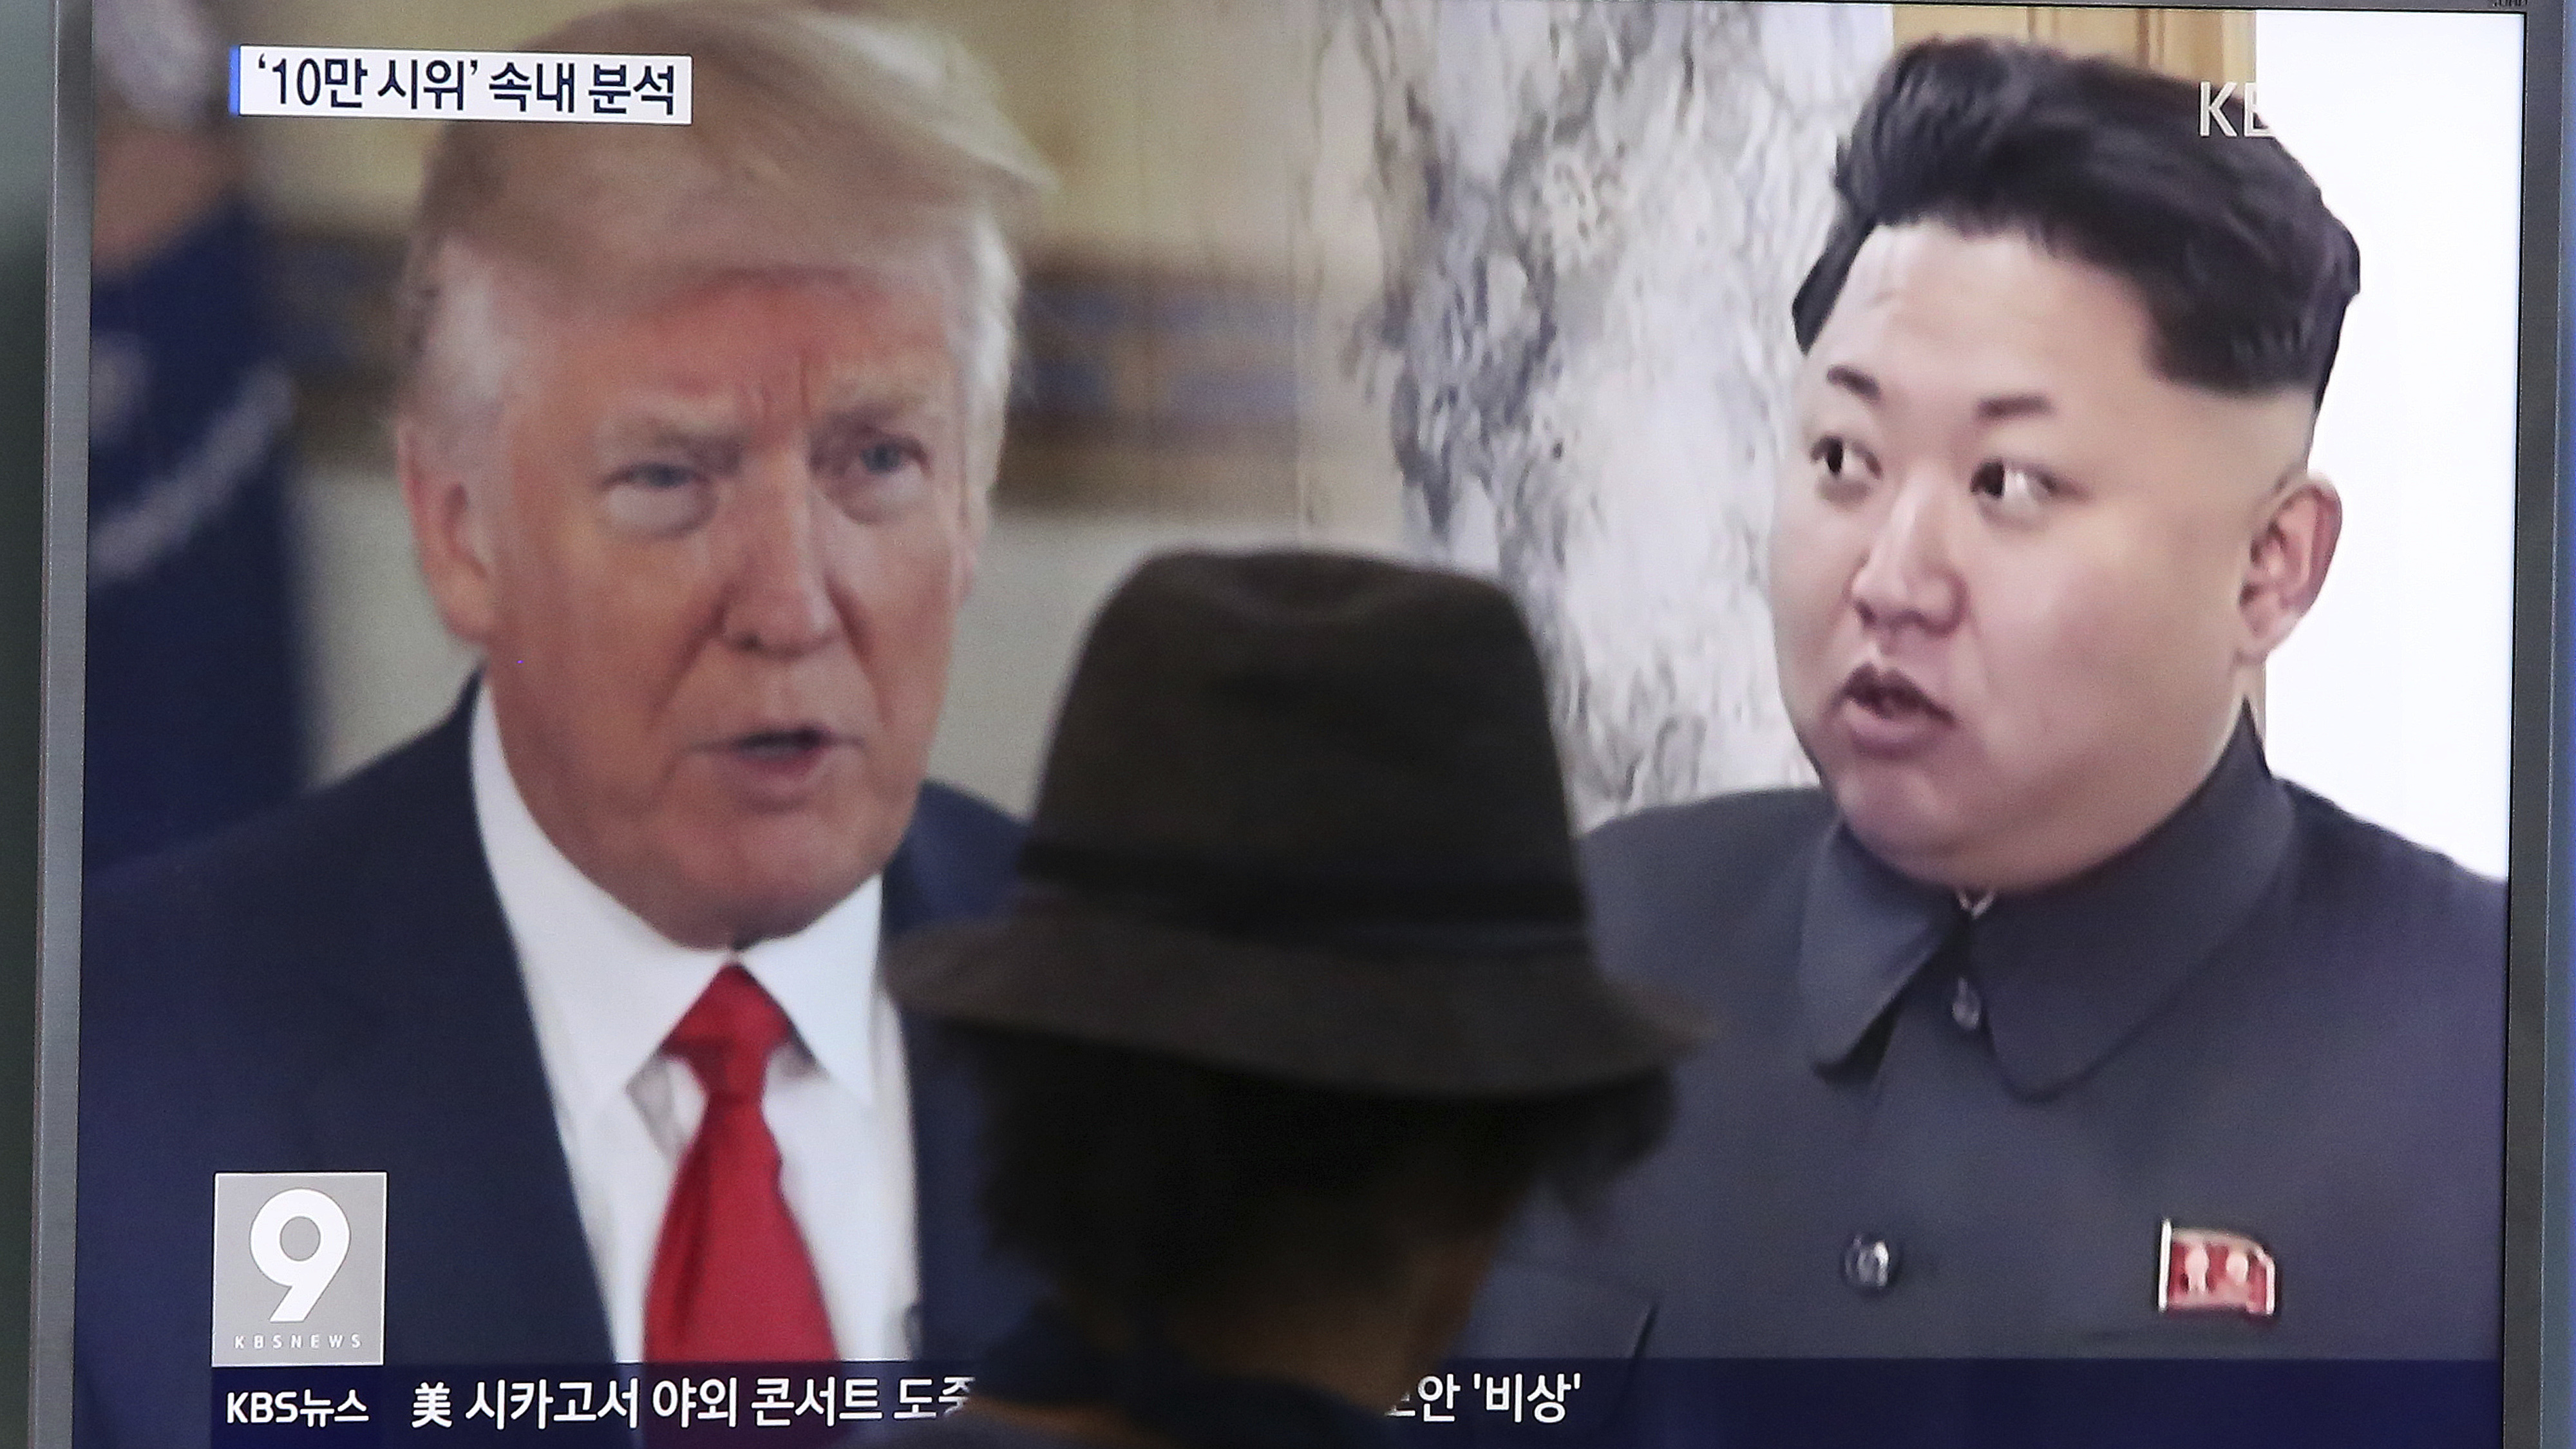 A man at the Seoul, South Korea, train station last August watches a news program featuring President Trump and North Korean leader Kim Jong Un.